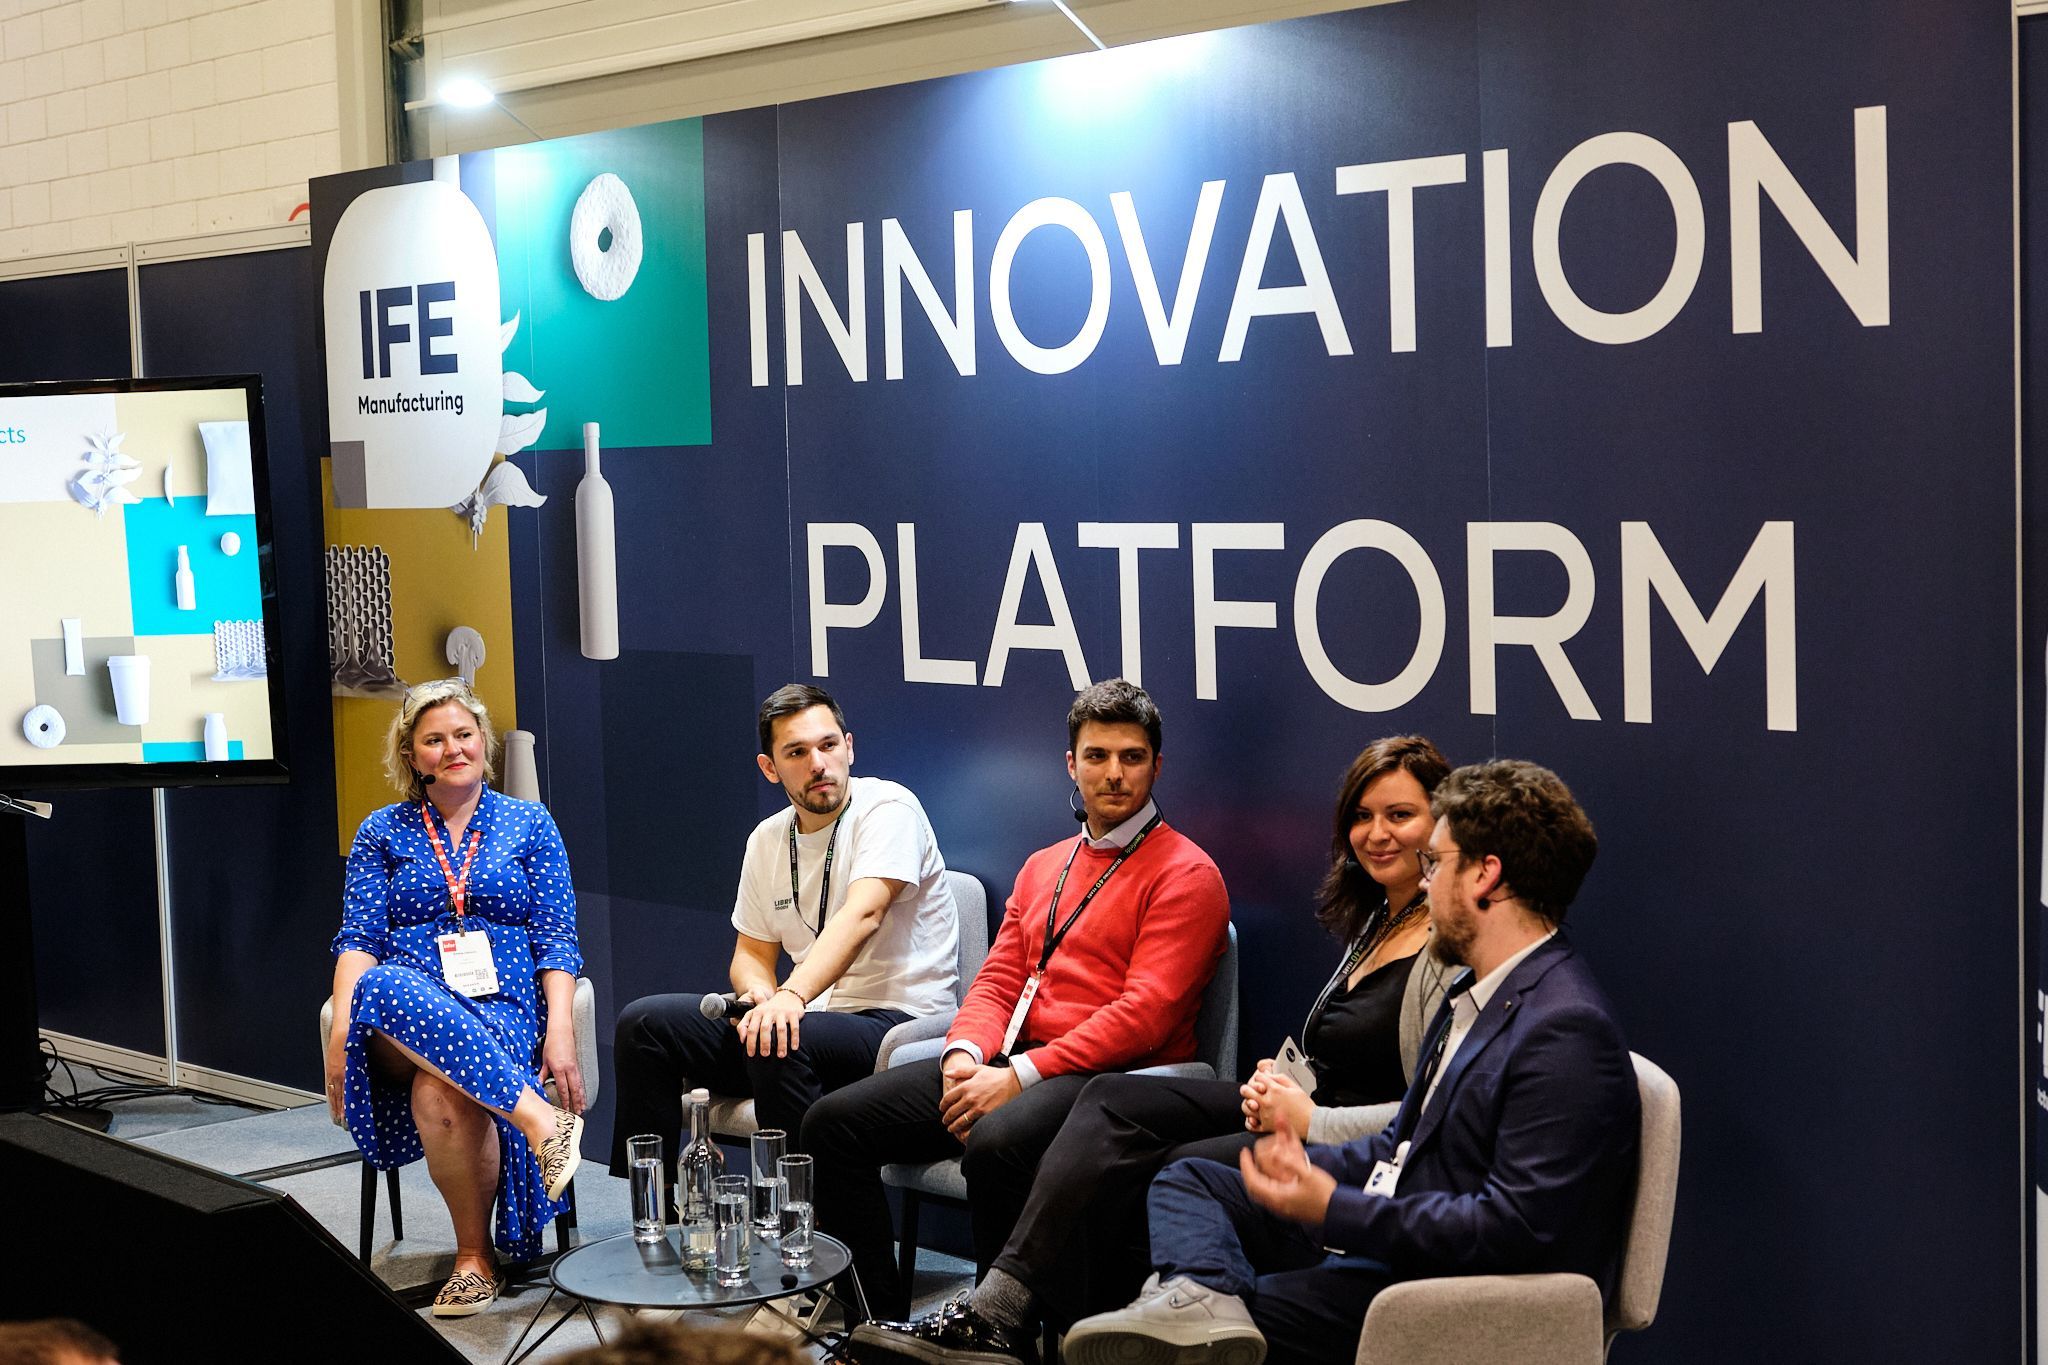 Day Two of IFE Manufacturing tackles key trends in food & drink development